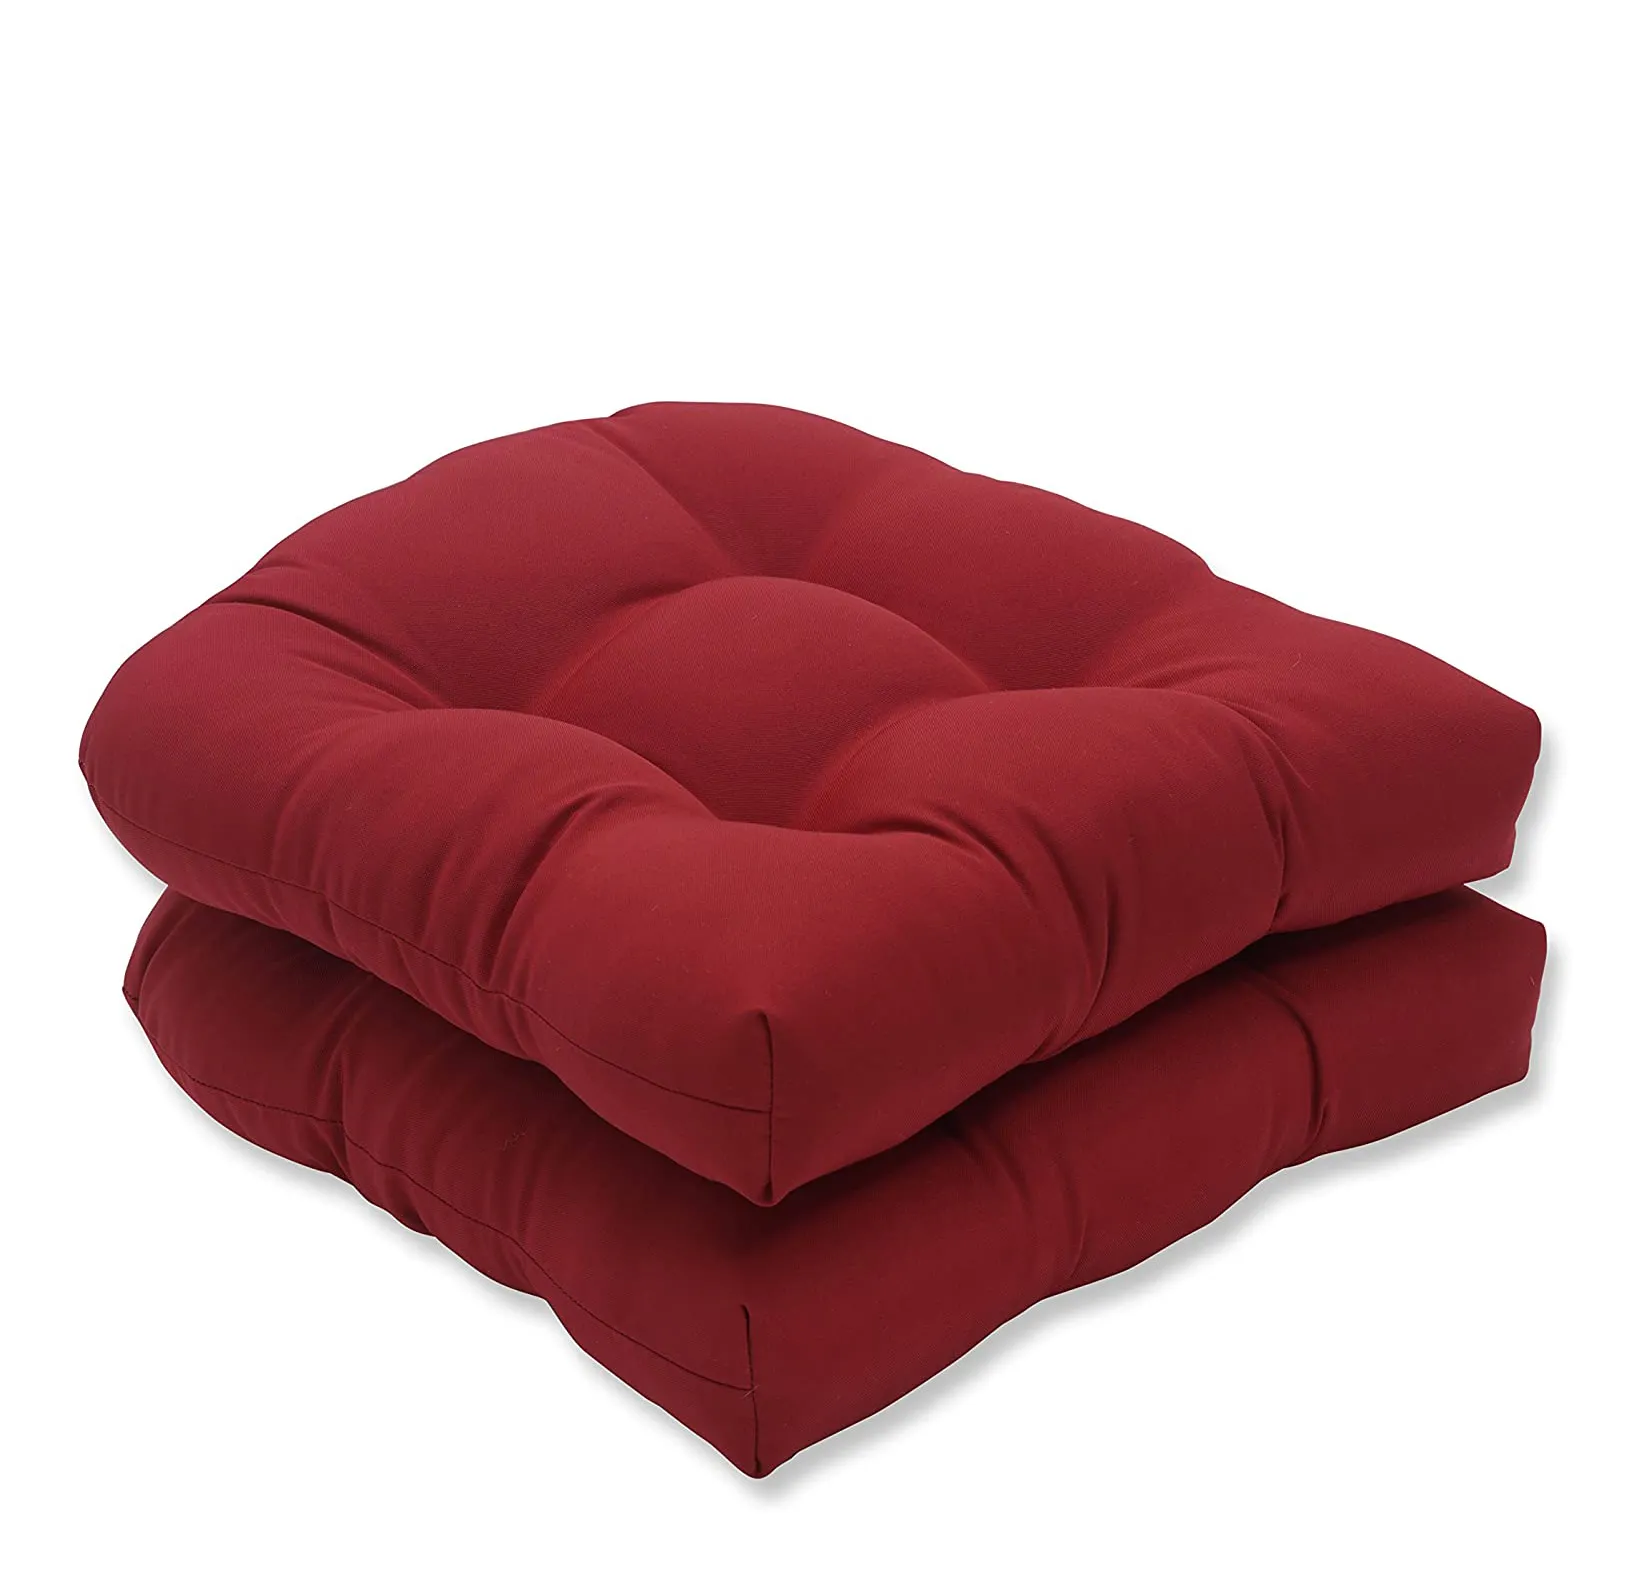 High Quality Thick Outdoor Garden Seat Red Waterproof Patio Chair Cushions